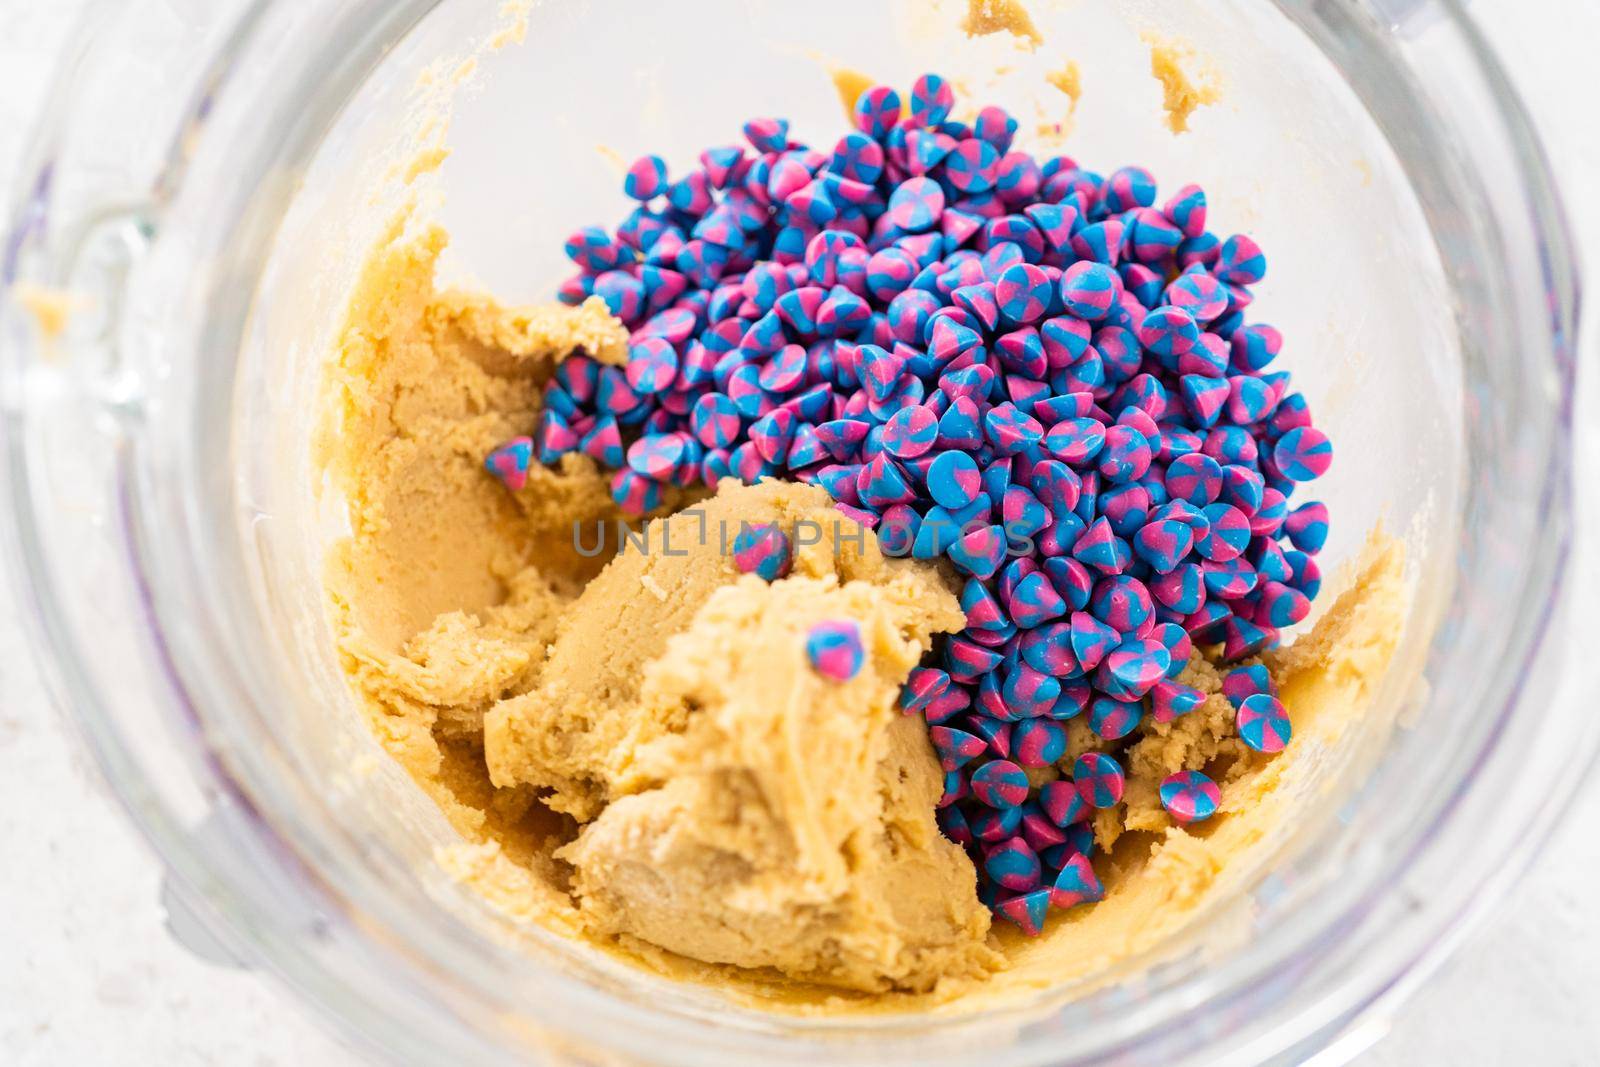 Mixing in rainbow chocolate chips with cookie dough to bake unicorn chocolate chip cookies.